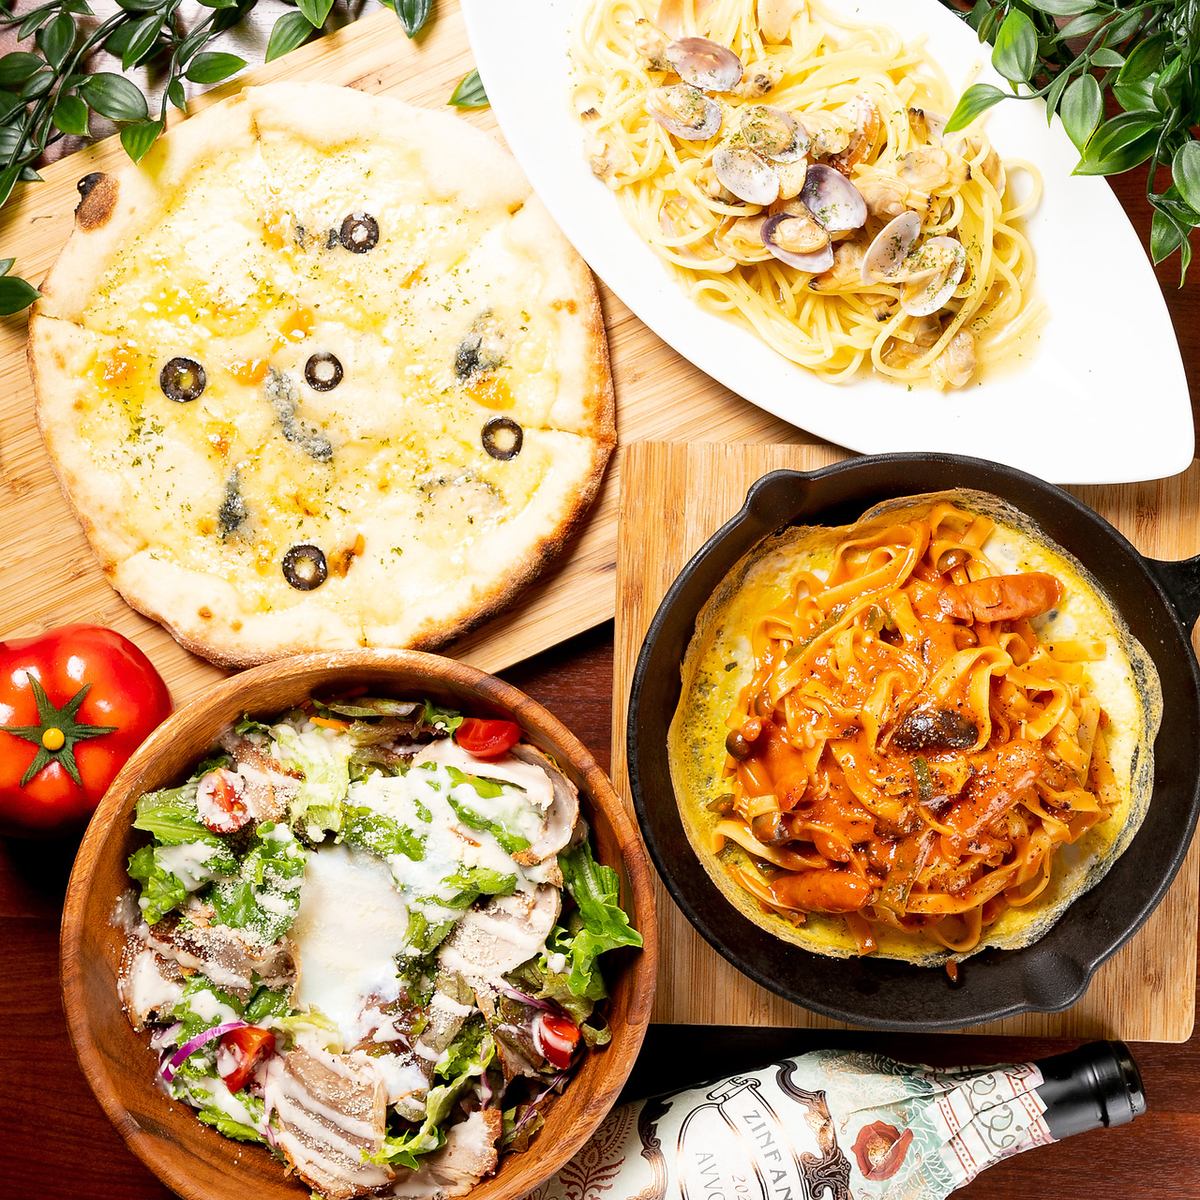 Affordable price for authentic pasta and pizza.Perfect for parties and girls-only gatherings!